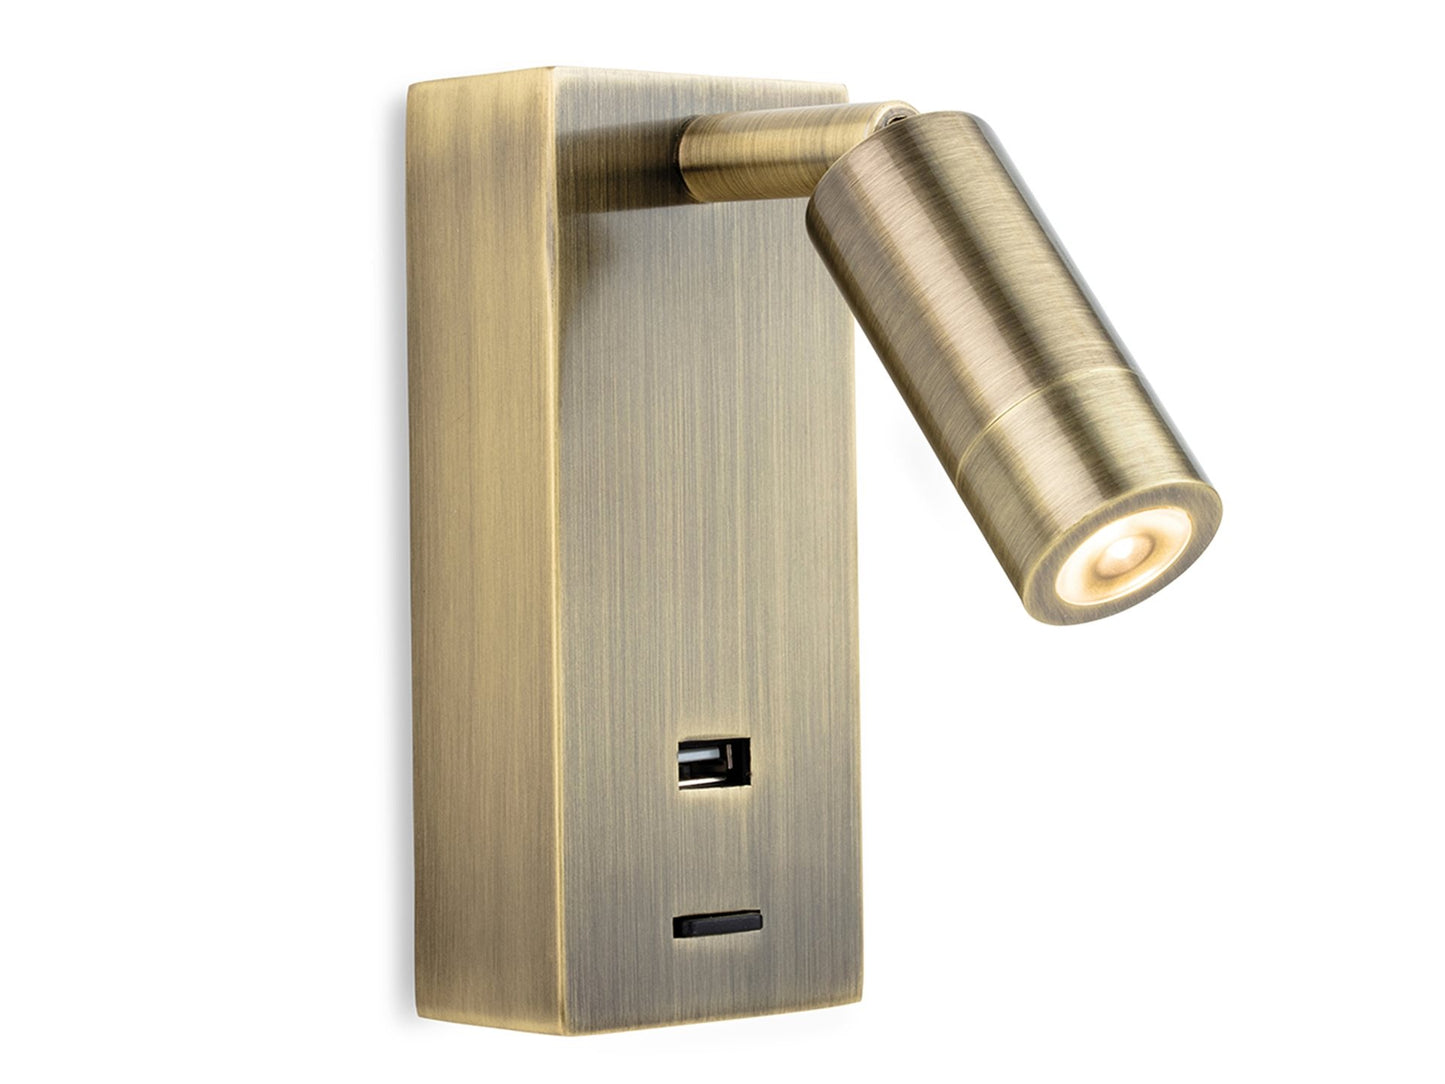 Clifton LED Wall Light with USB PortAntique Brass